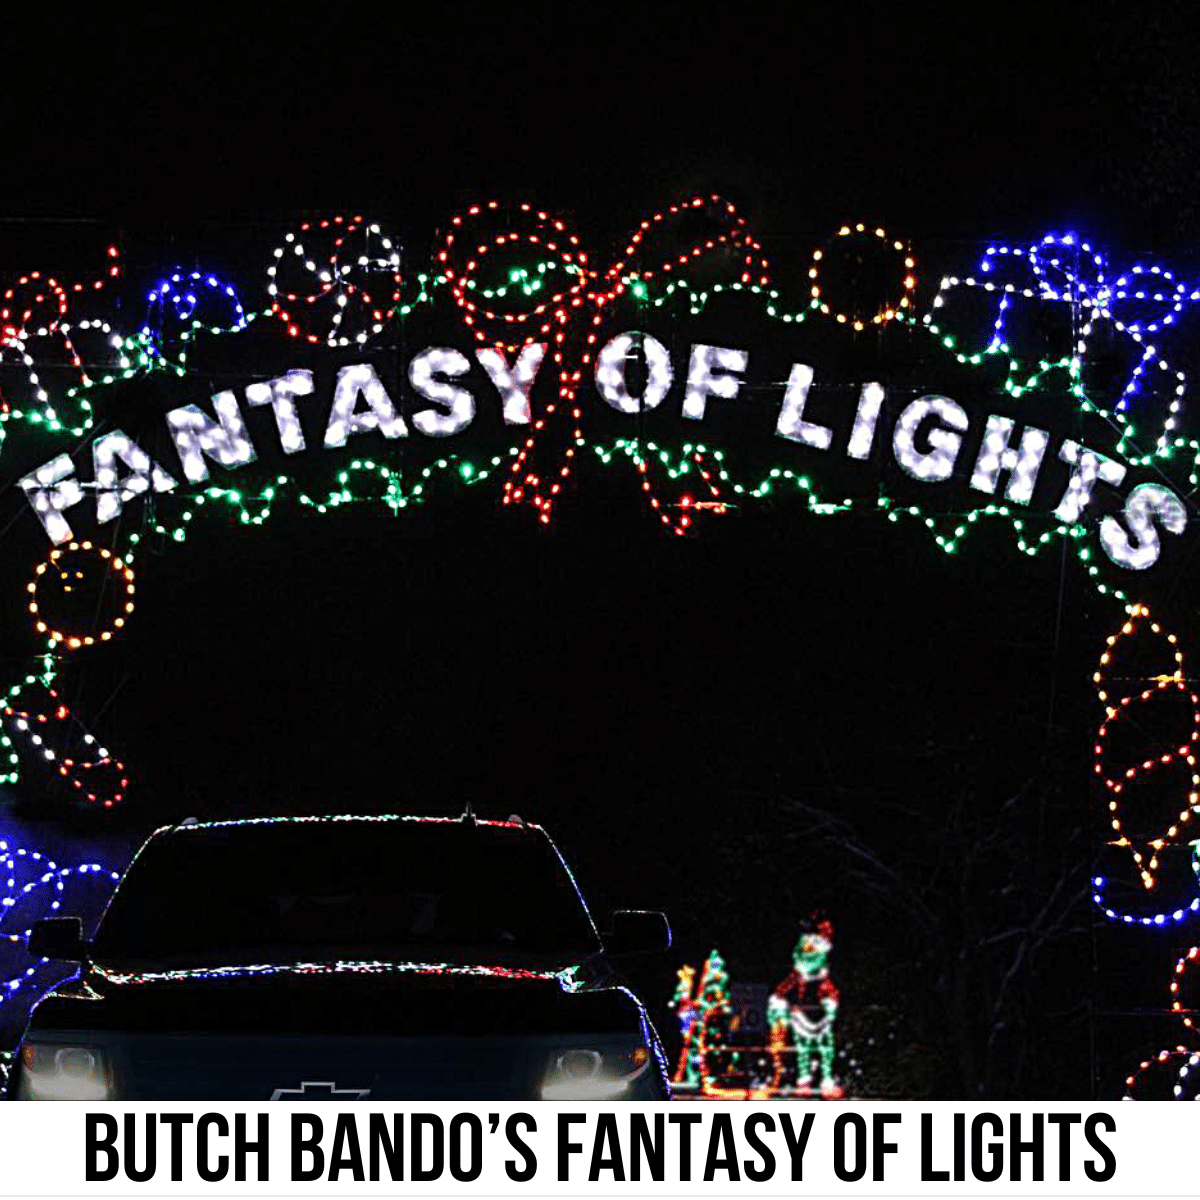 Square image with a photo of the entrance of Butch Bando's Fantasy of Lights show